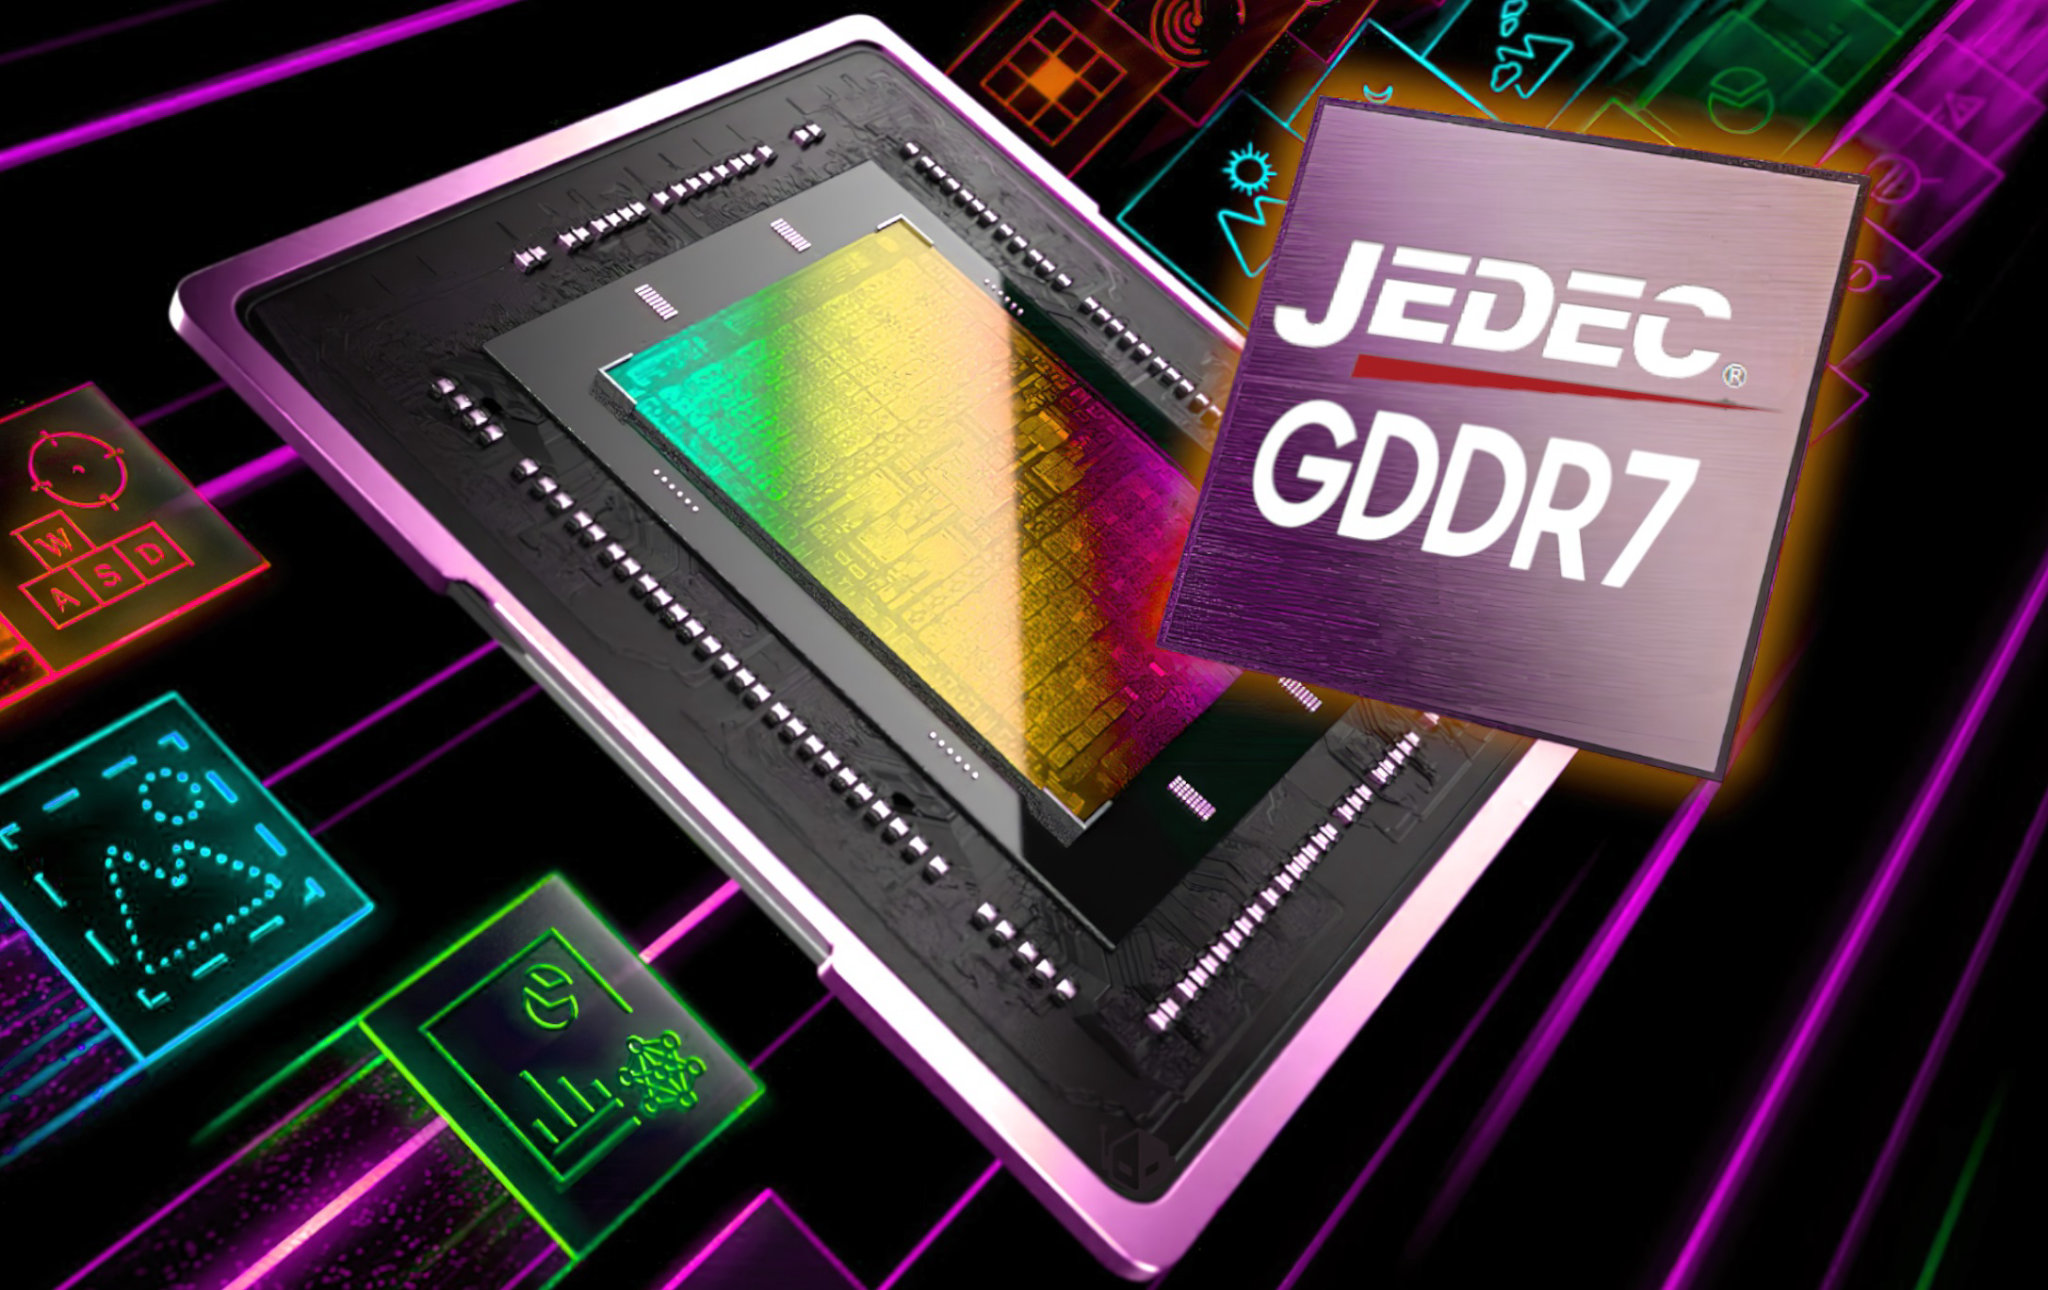 GDDR7 video memory standard officially released: bandwidth doubled, AMD and Nvidia both announced full support